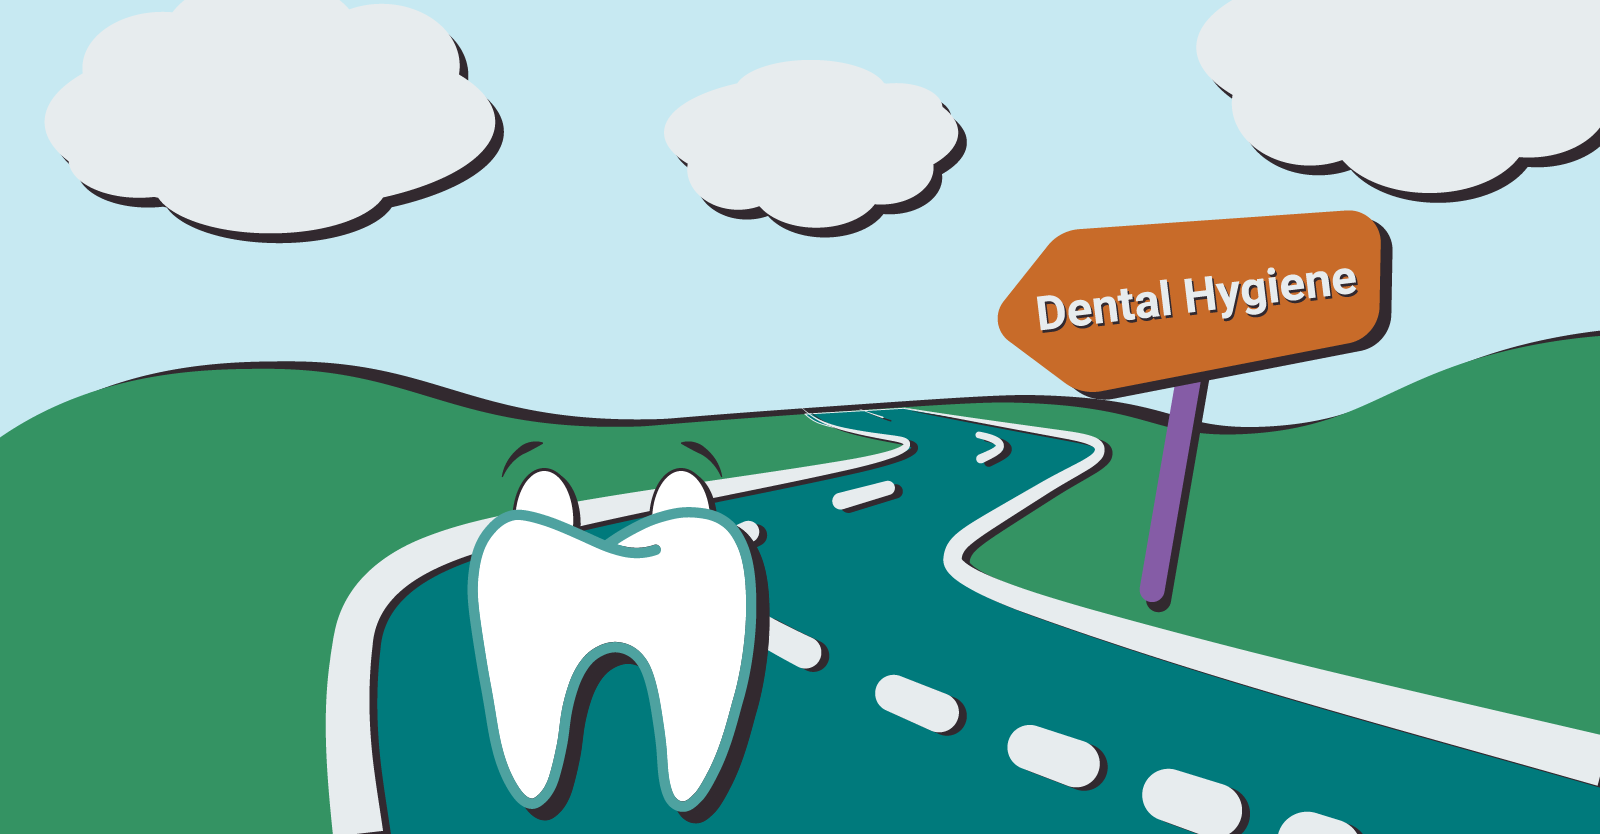 How To Become a Dental Hygienist in North Carolina